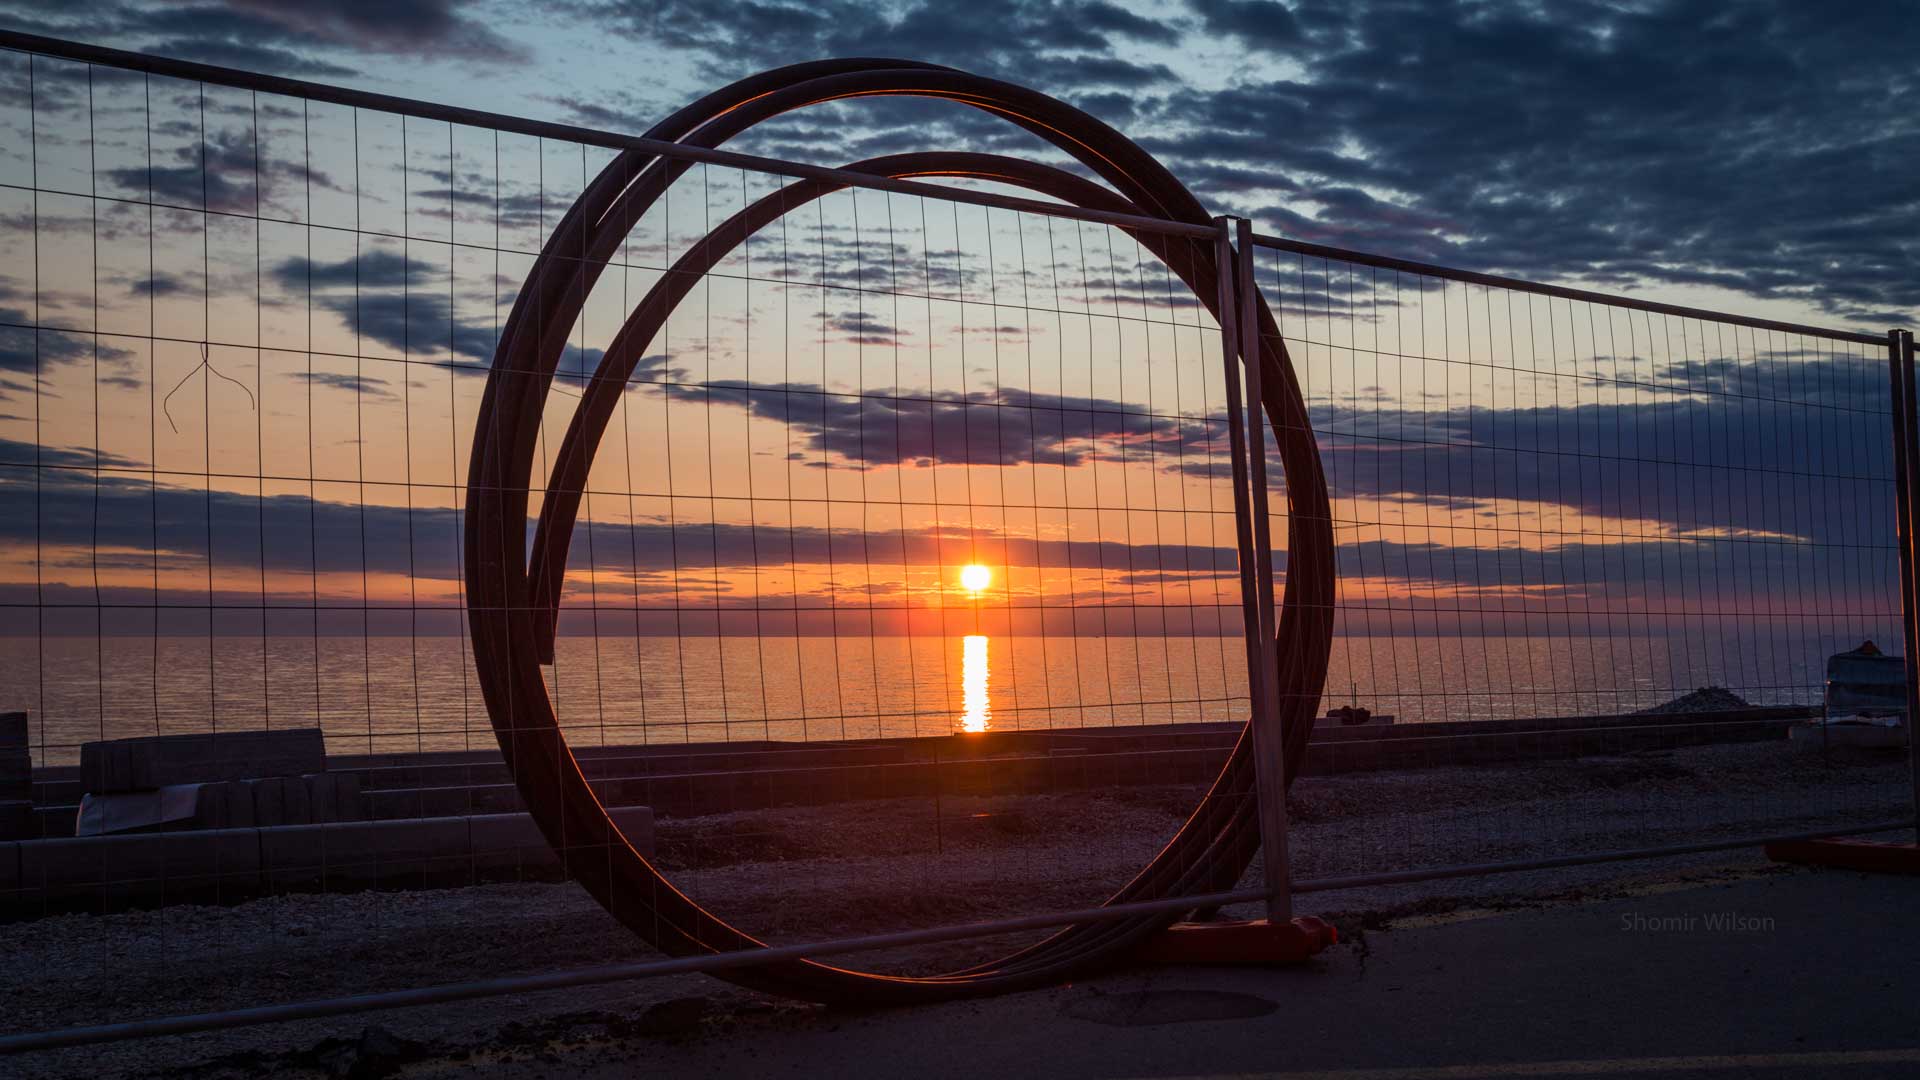 loop of tubing leaning against a fence and encircling a sunset over water